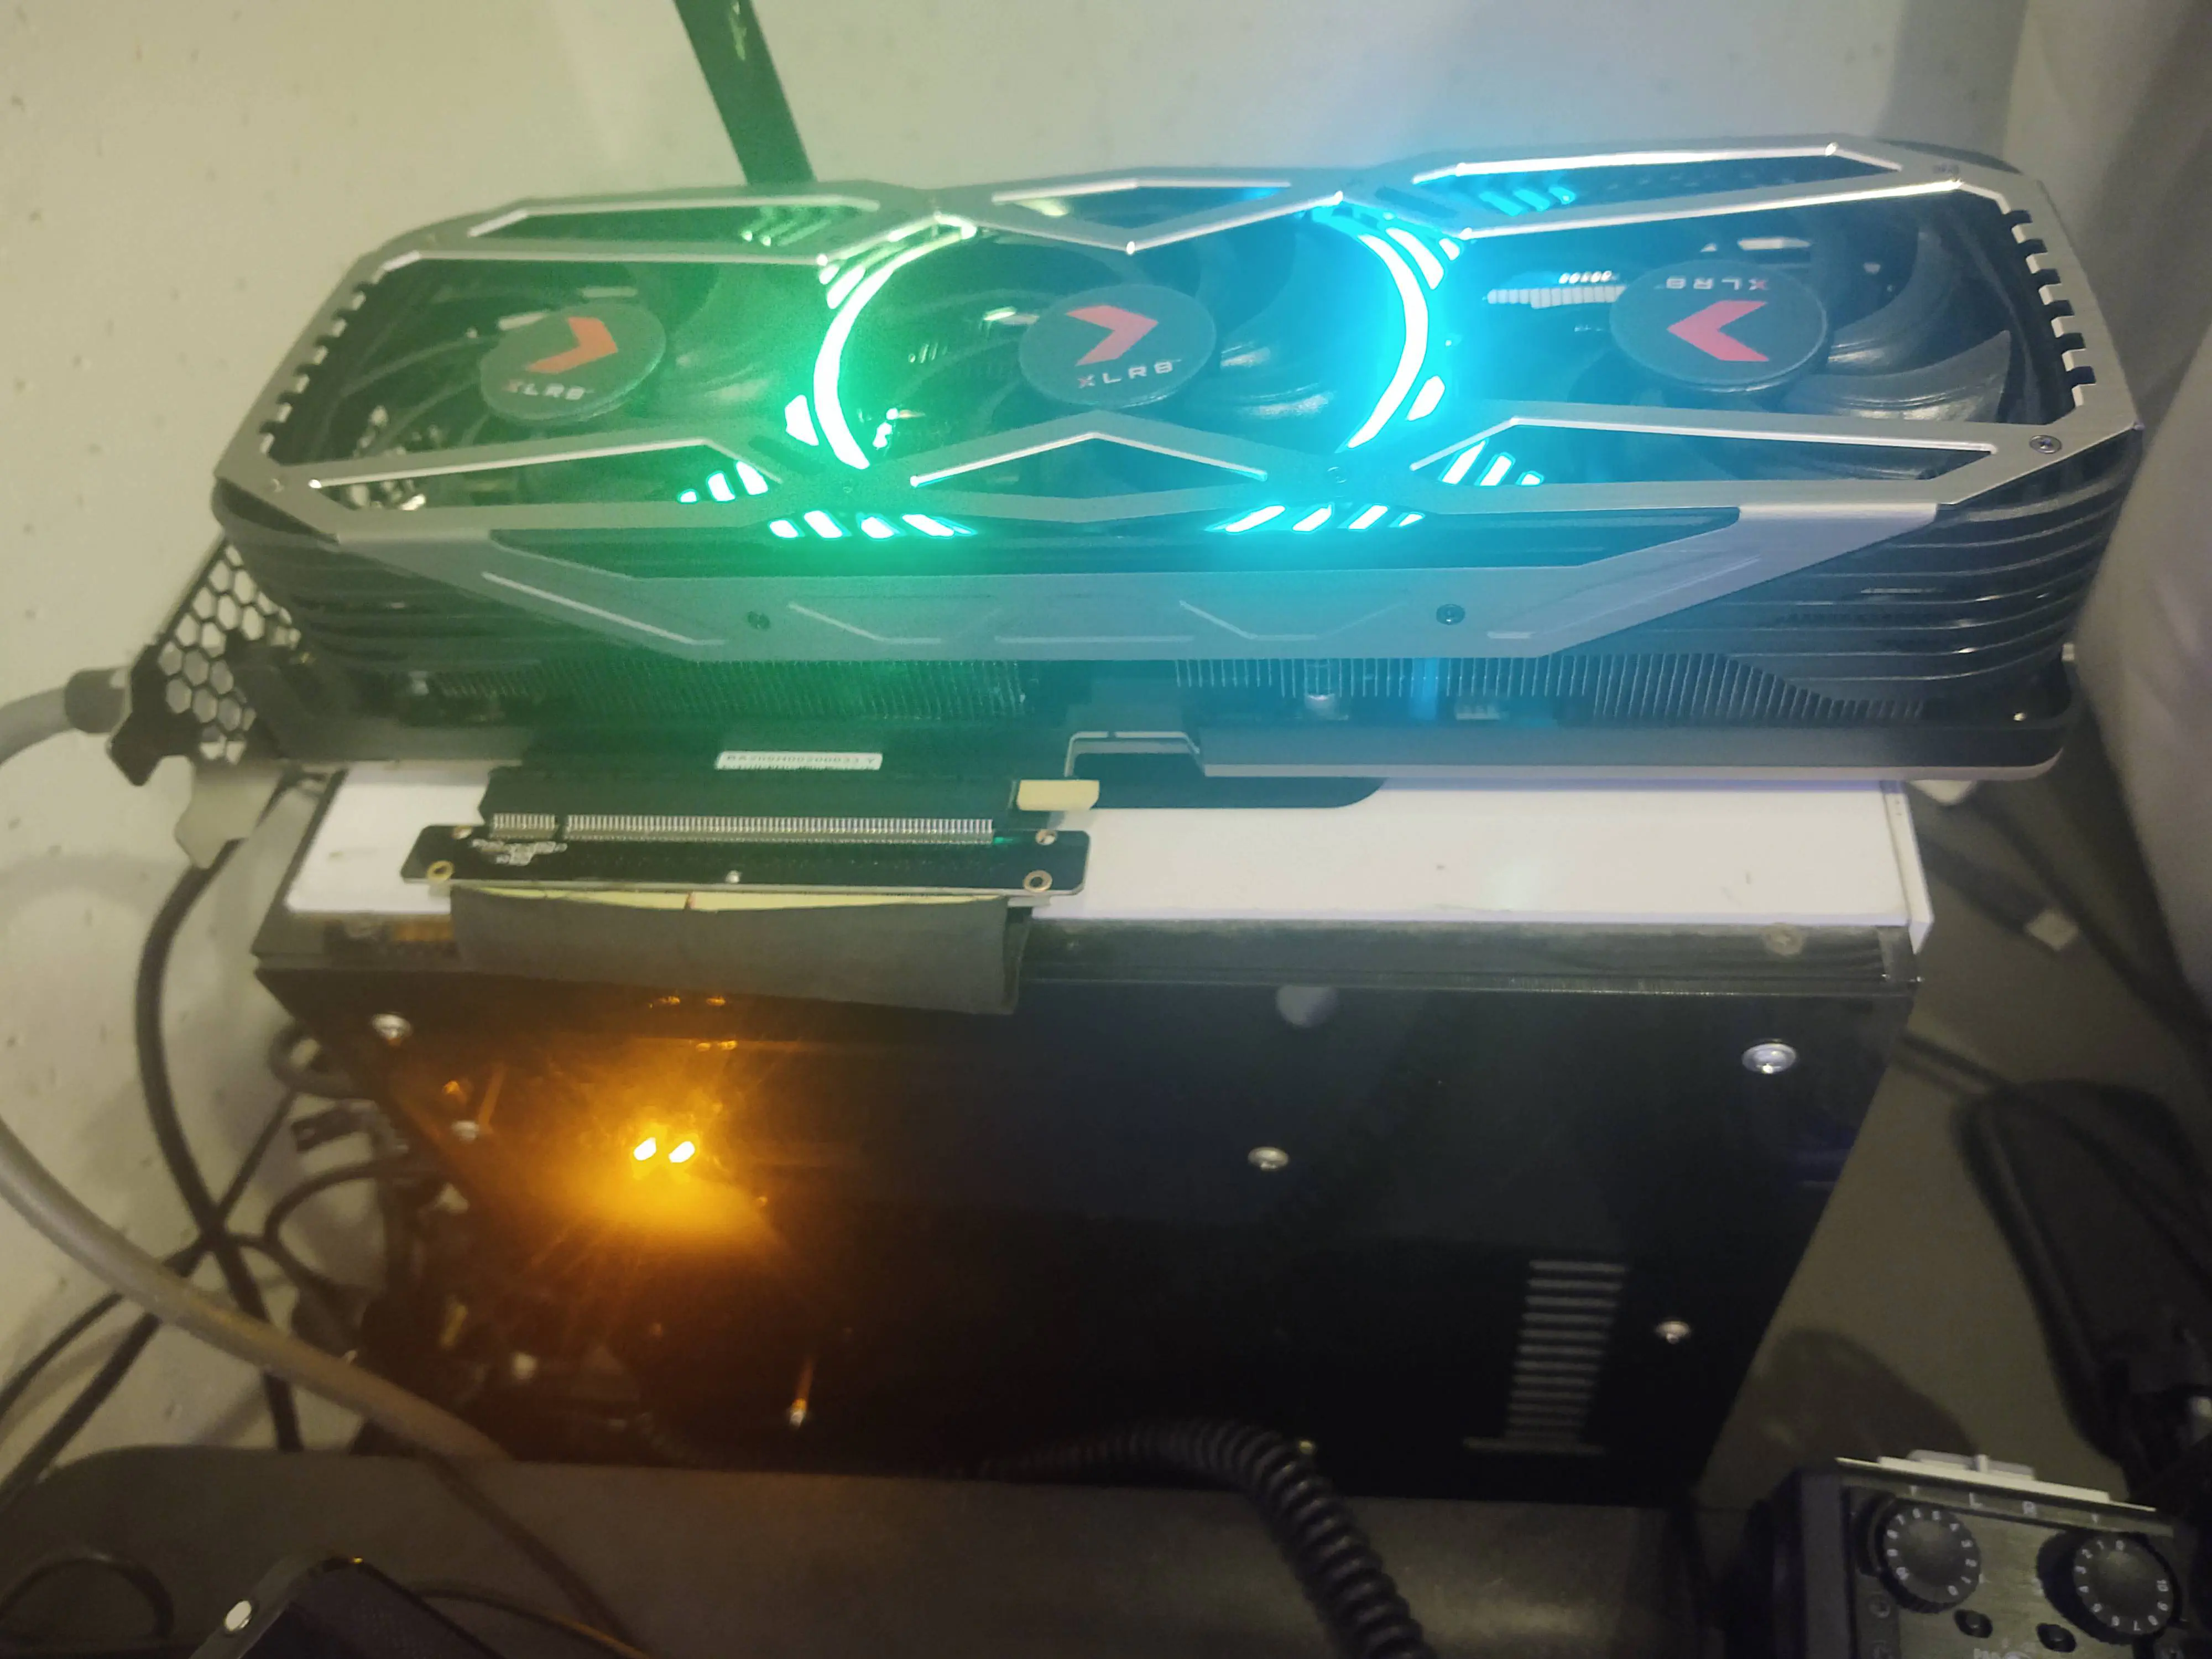 A personal computer with graphics card sitting outside of its case.